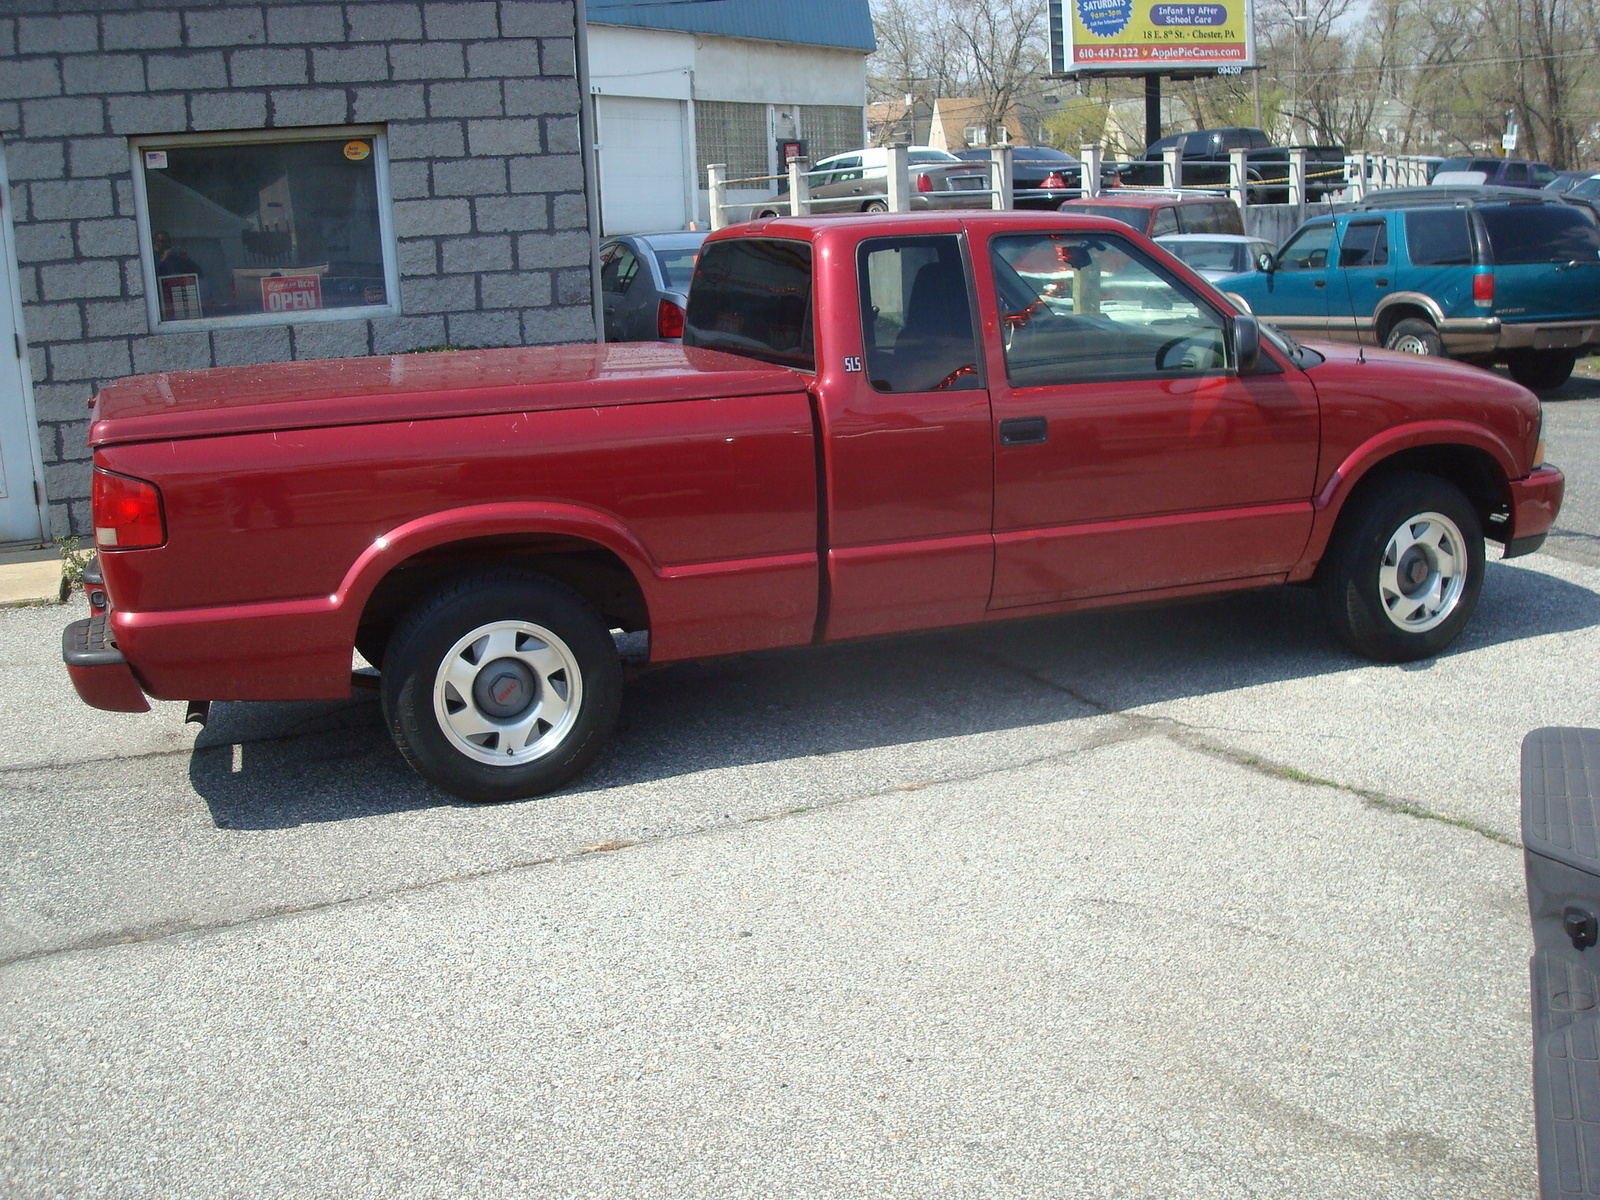 2001 Gmc pickup specifications #3